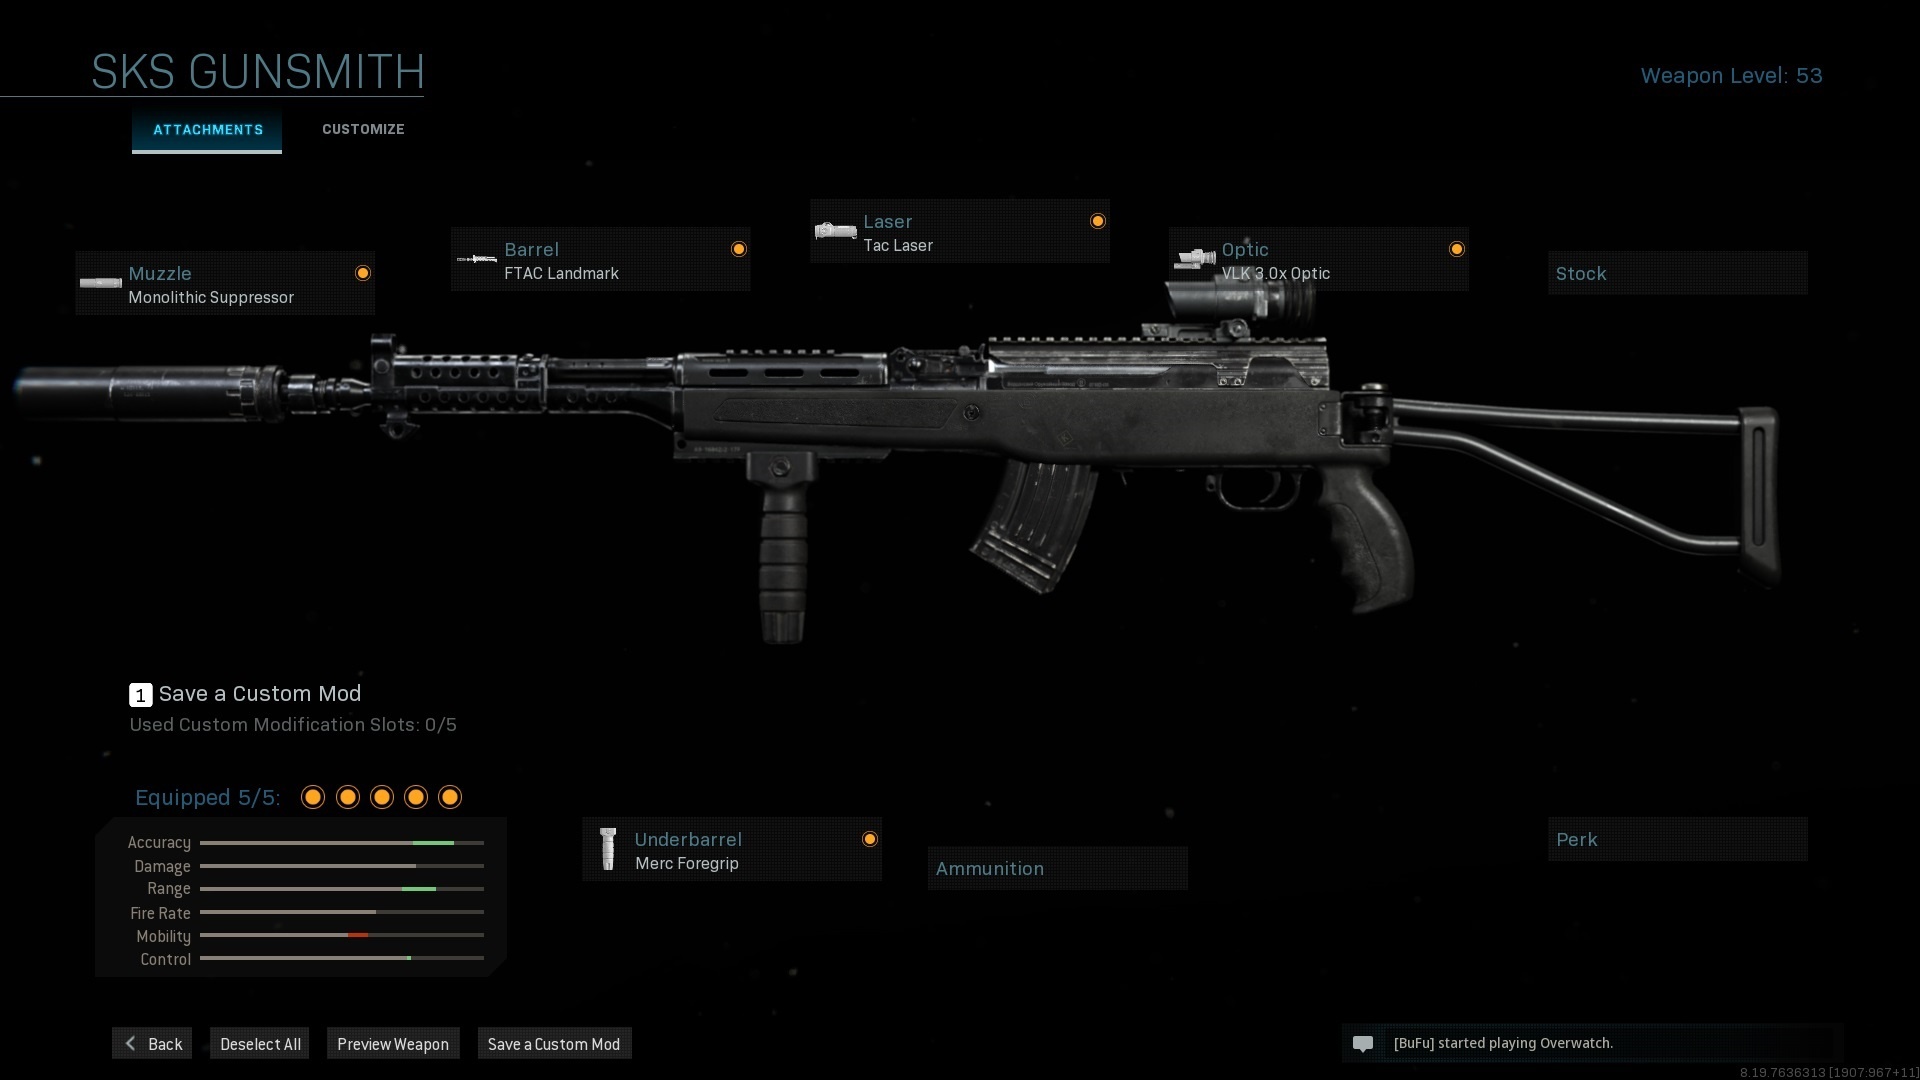 Learn How to Get the New SKS Weapon in Call of Duty